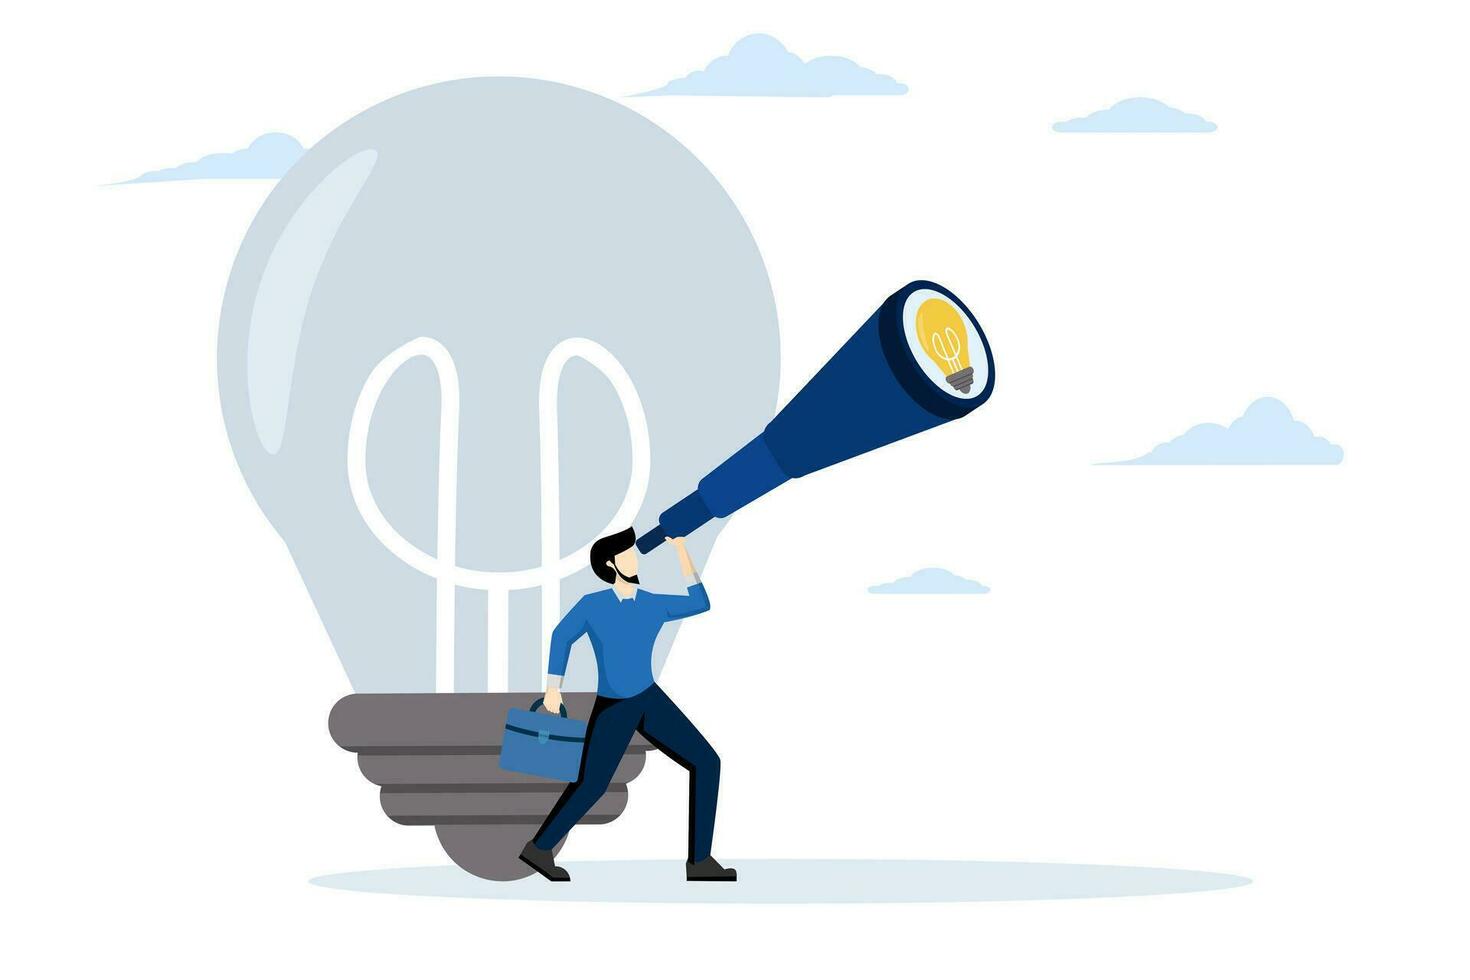 New opportunities, ideas or inspiration. Find new ideas in business. innovation or creativity. A businessman looks through a large pair of binoculars for a light bulb idea. flat vector illustration.